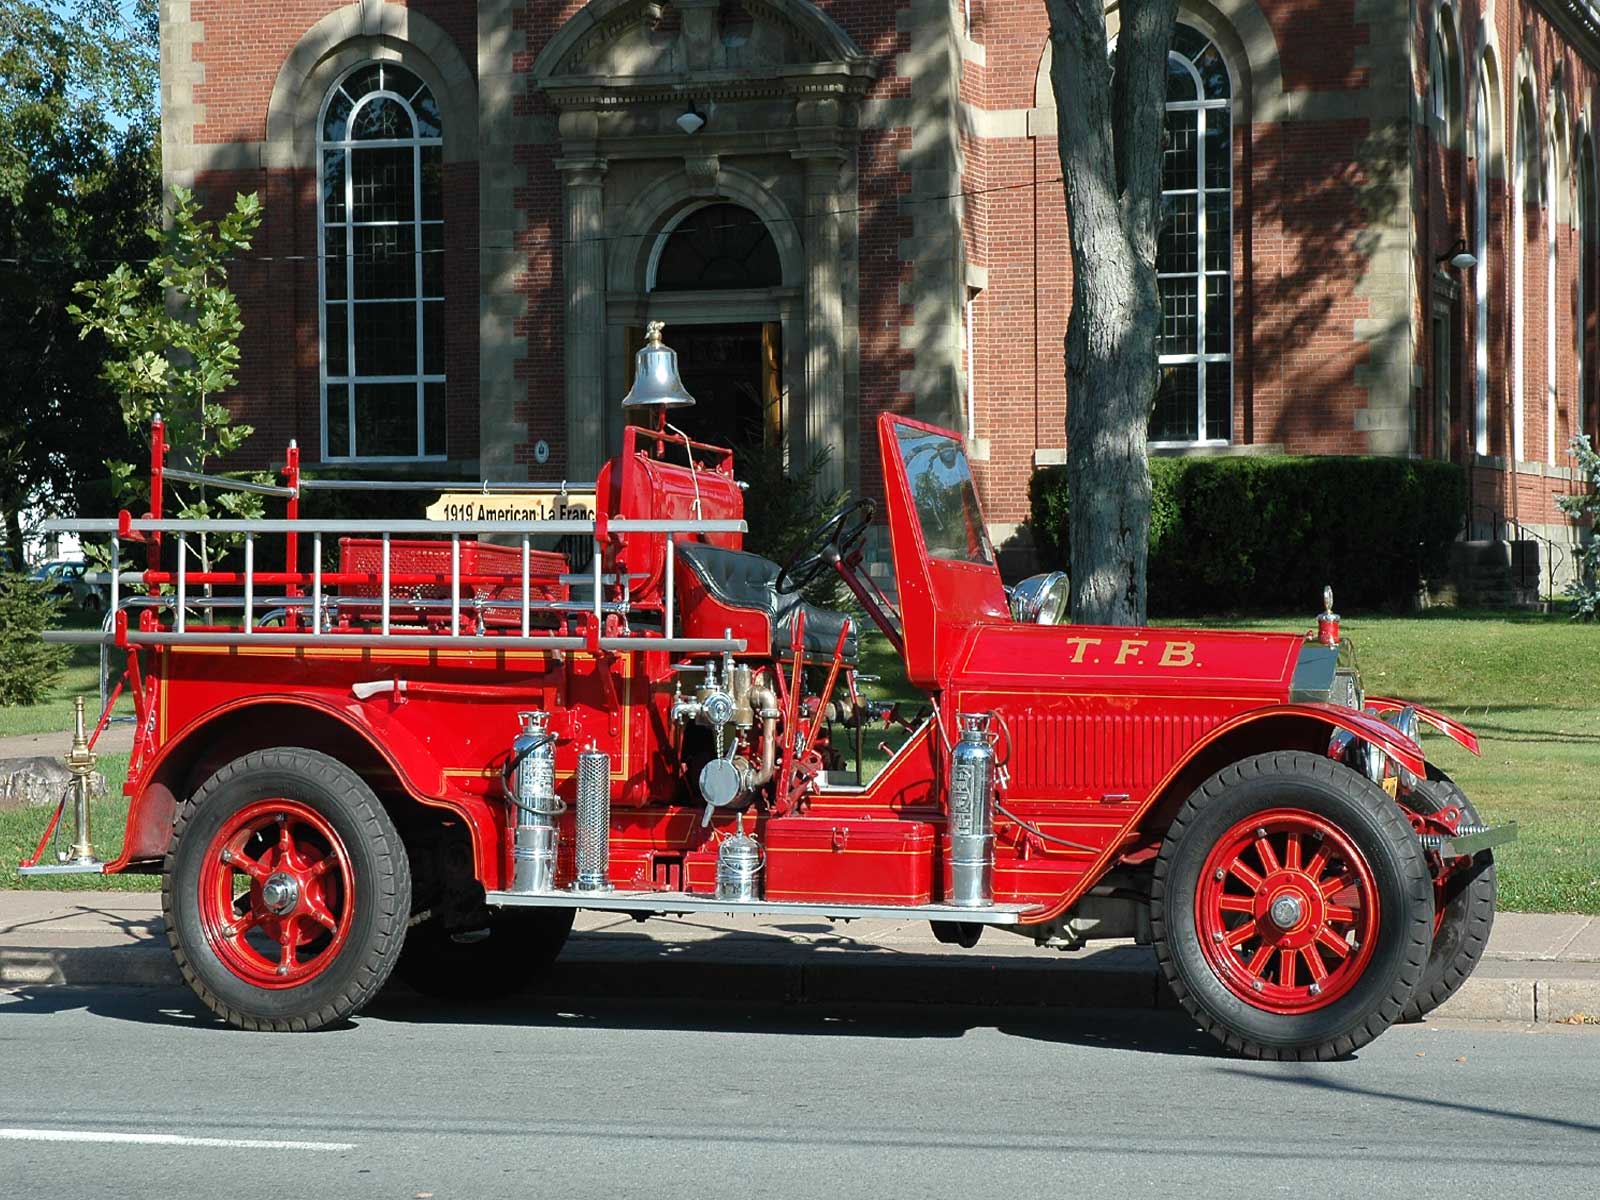 Old Fire Truck Wallpaper Image featuring Cars